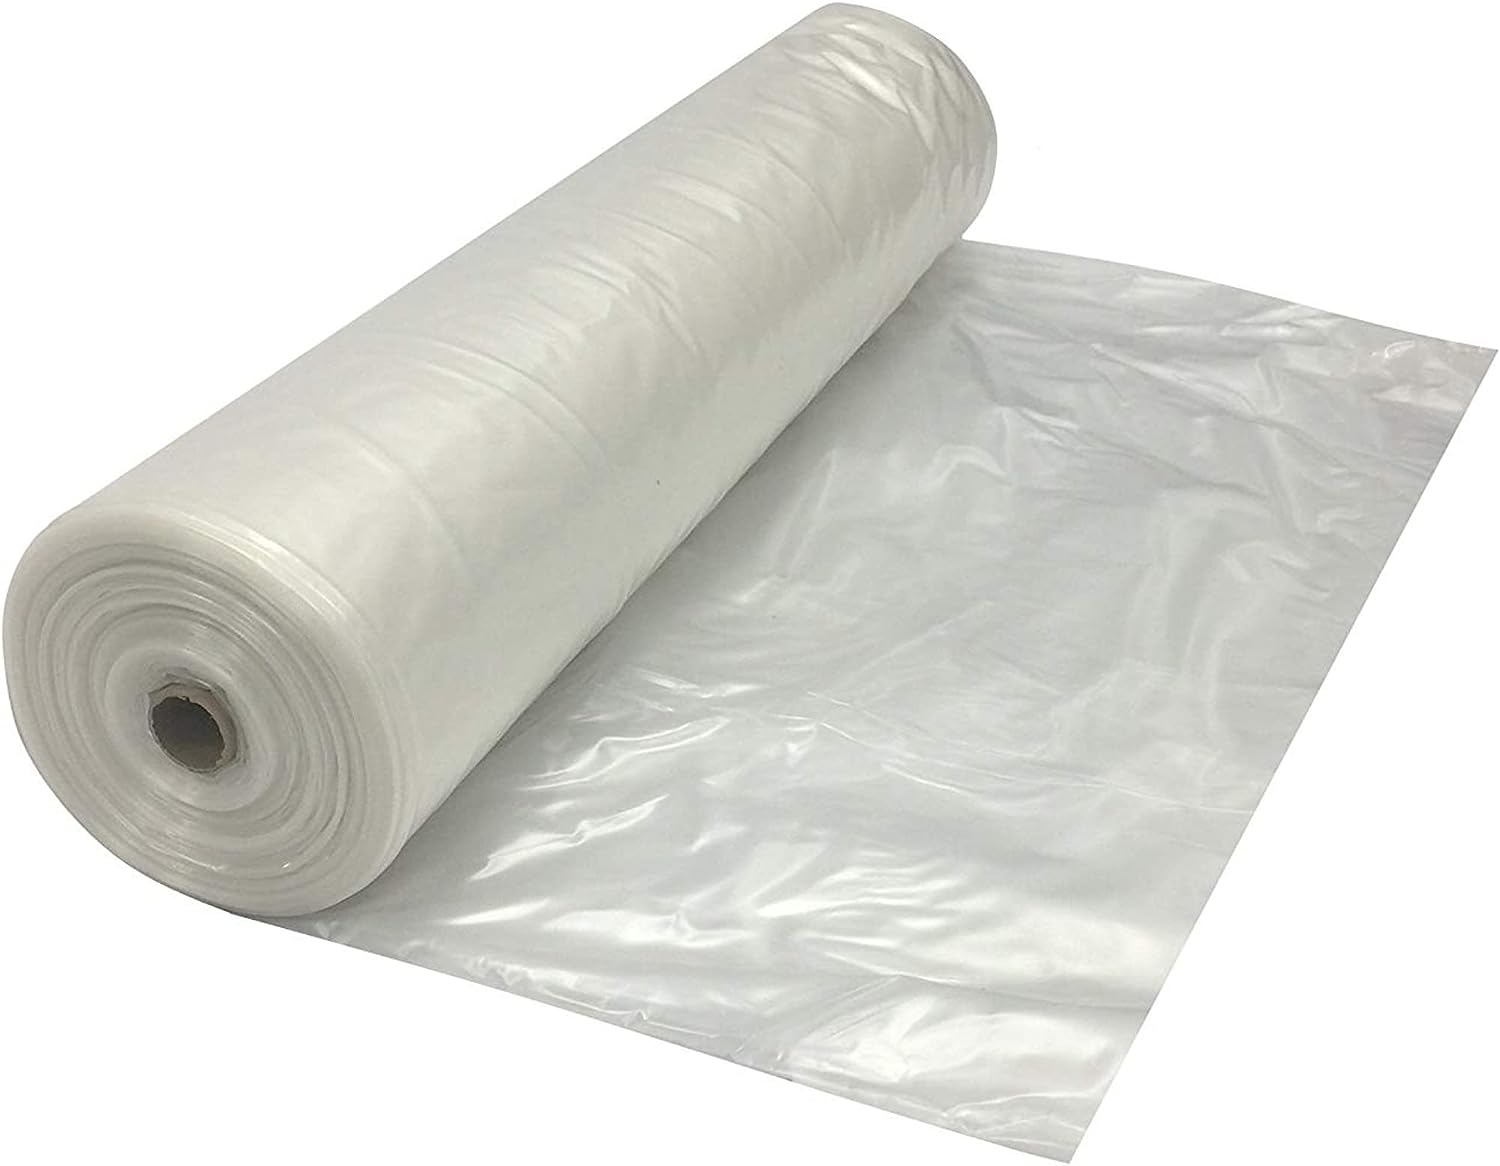 Poly Sheeting, 4 mil, 20' x 100' Clear